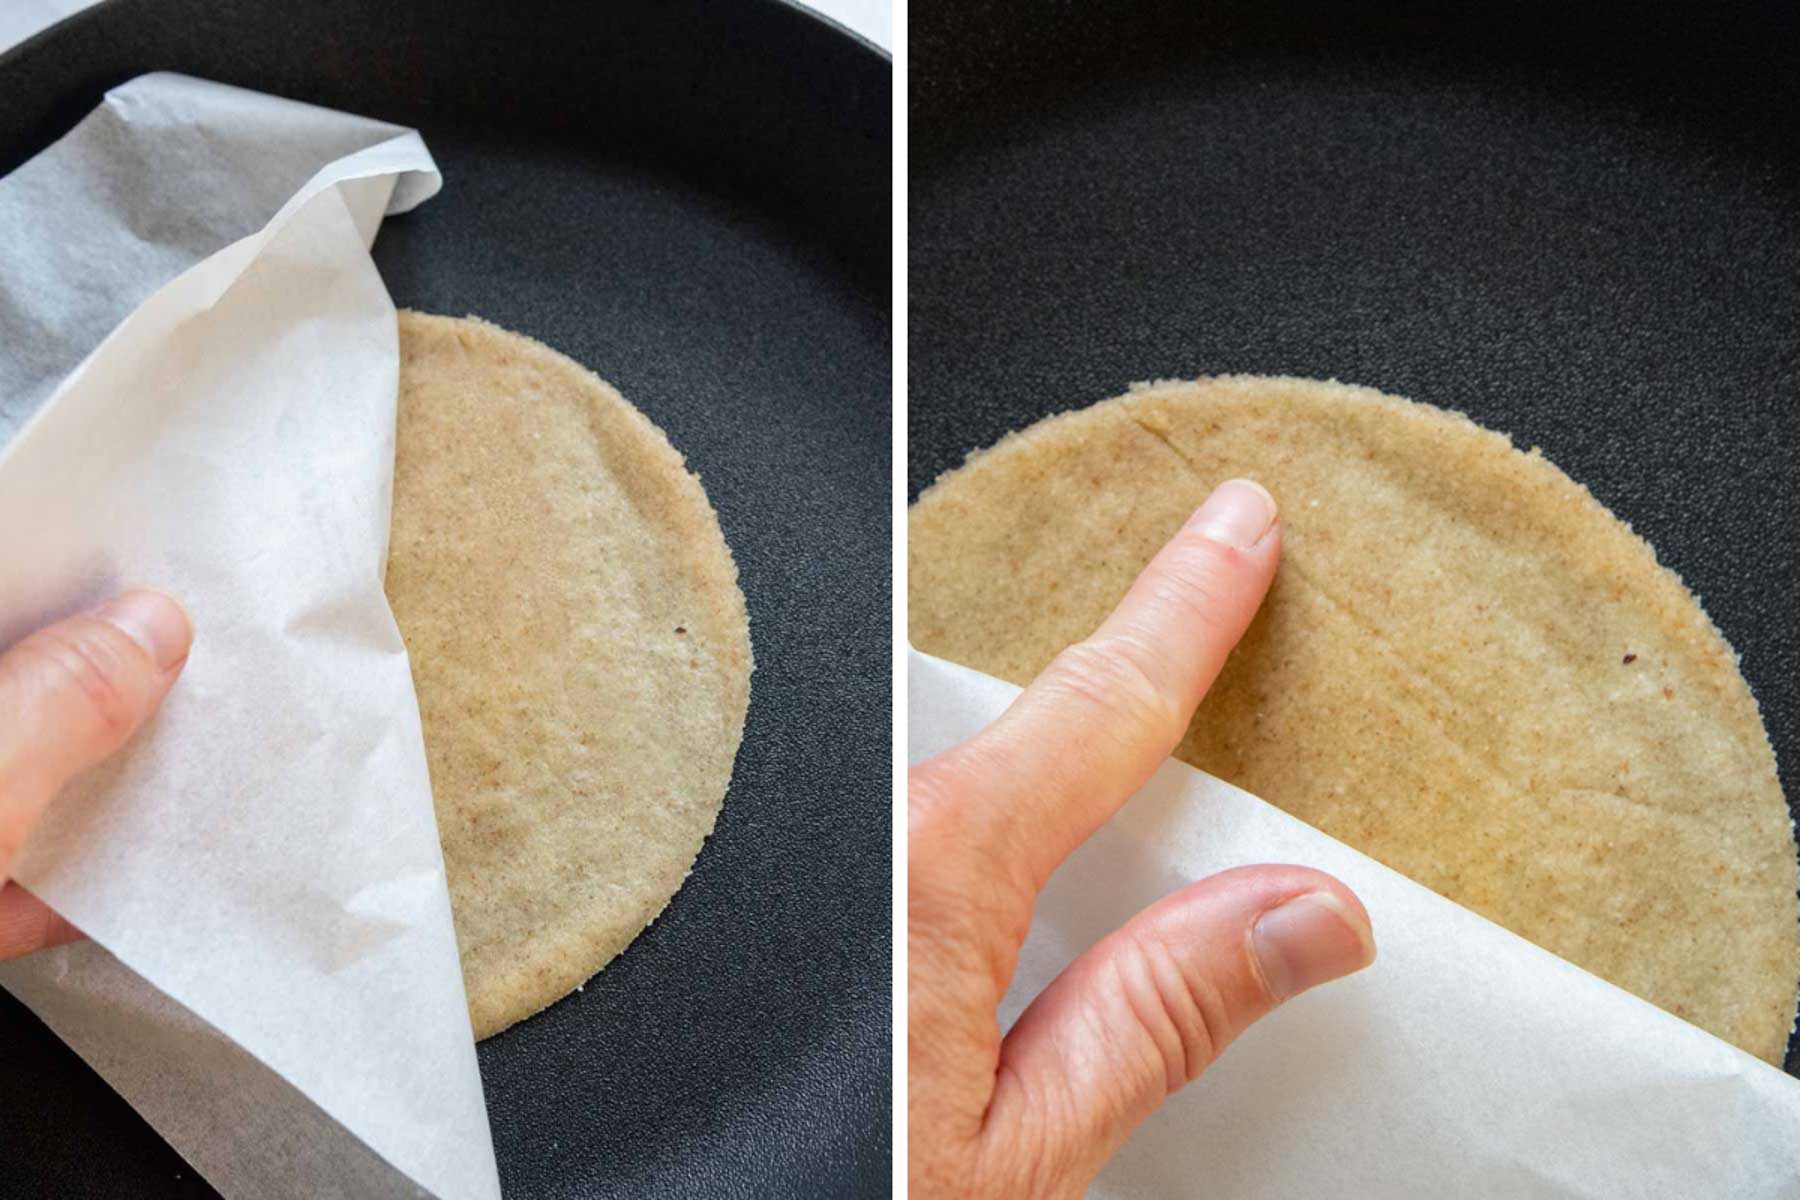 images showing how to cook almond flour tortillas.